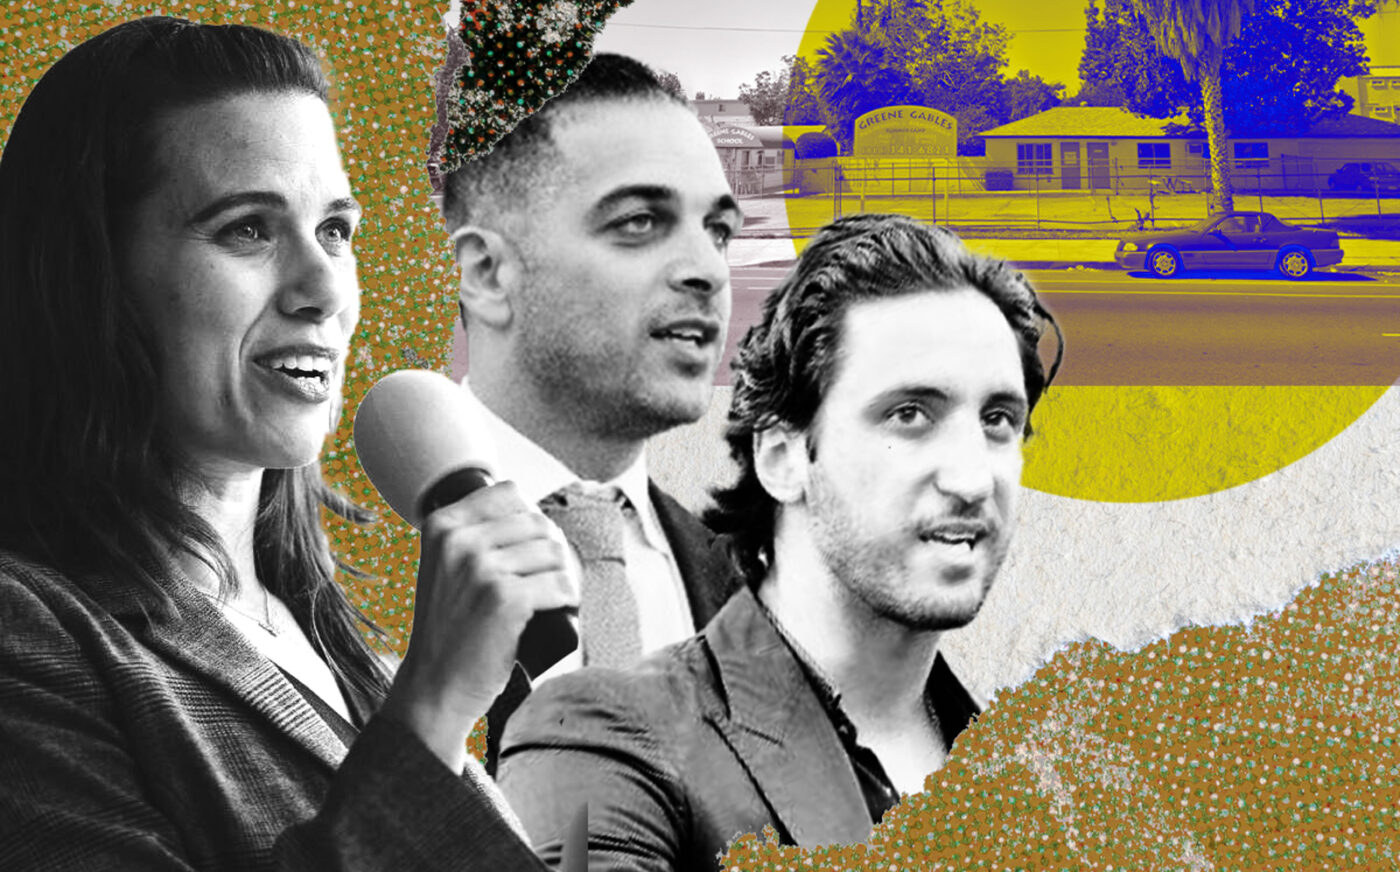 YIMBY Sues LA for Denial of Affordable Housing in Winnetka